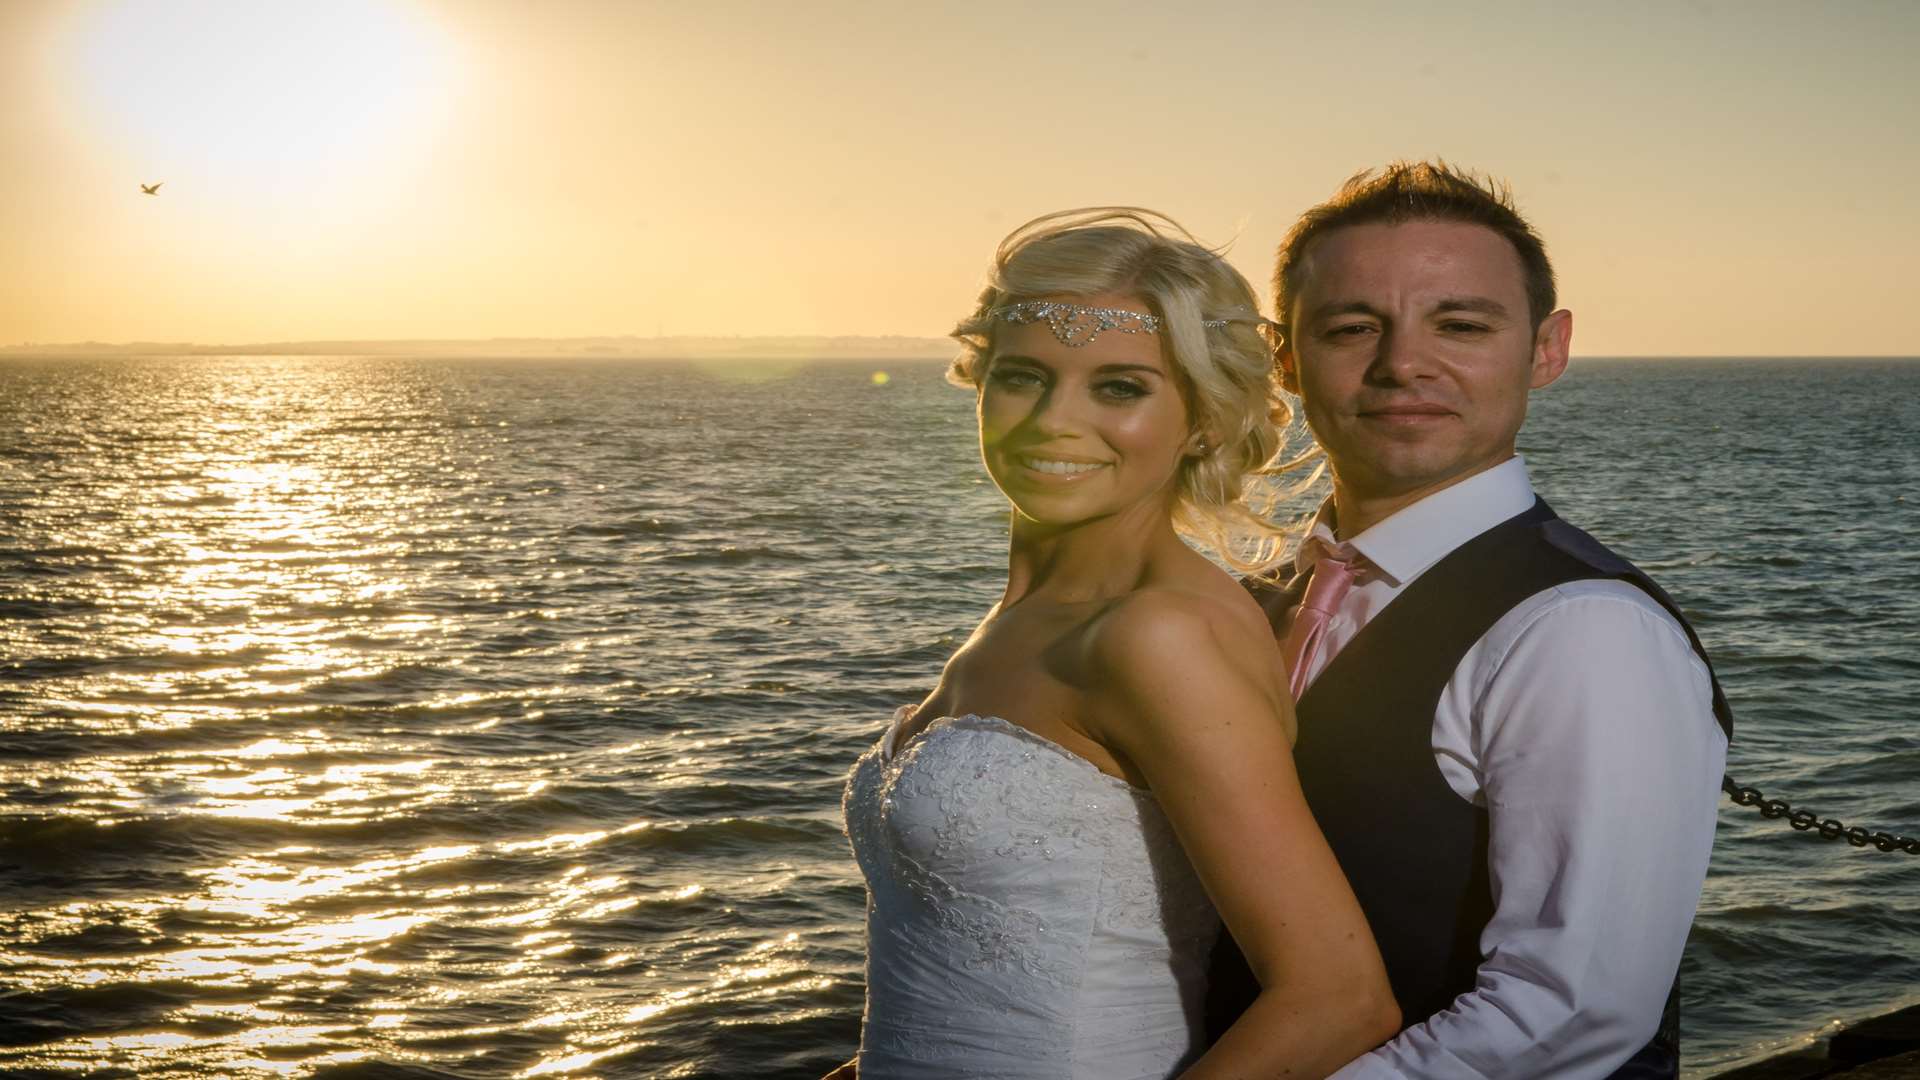 The sun sets on our wonderful wedding